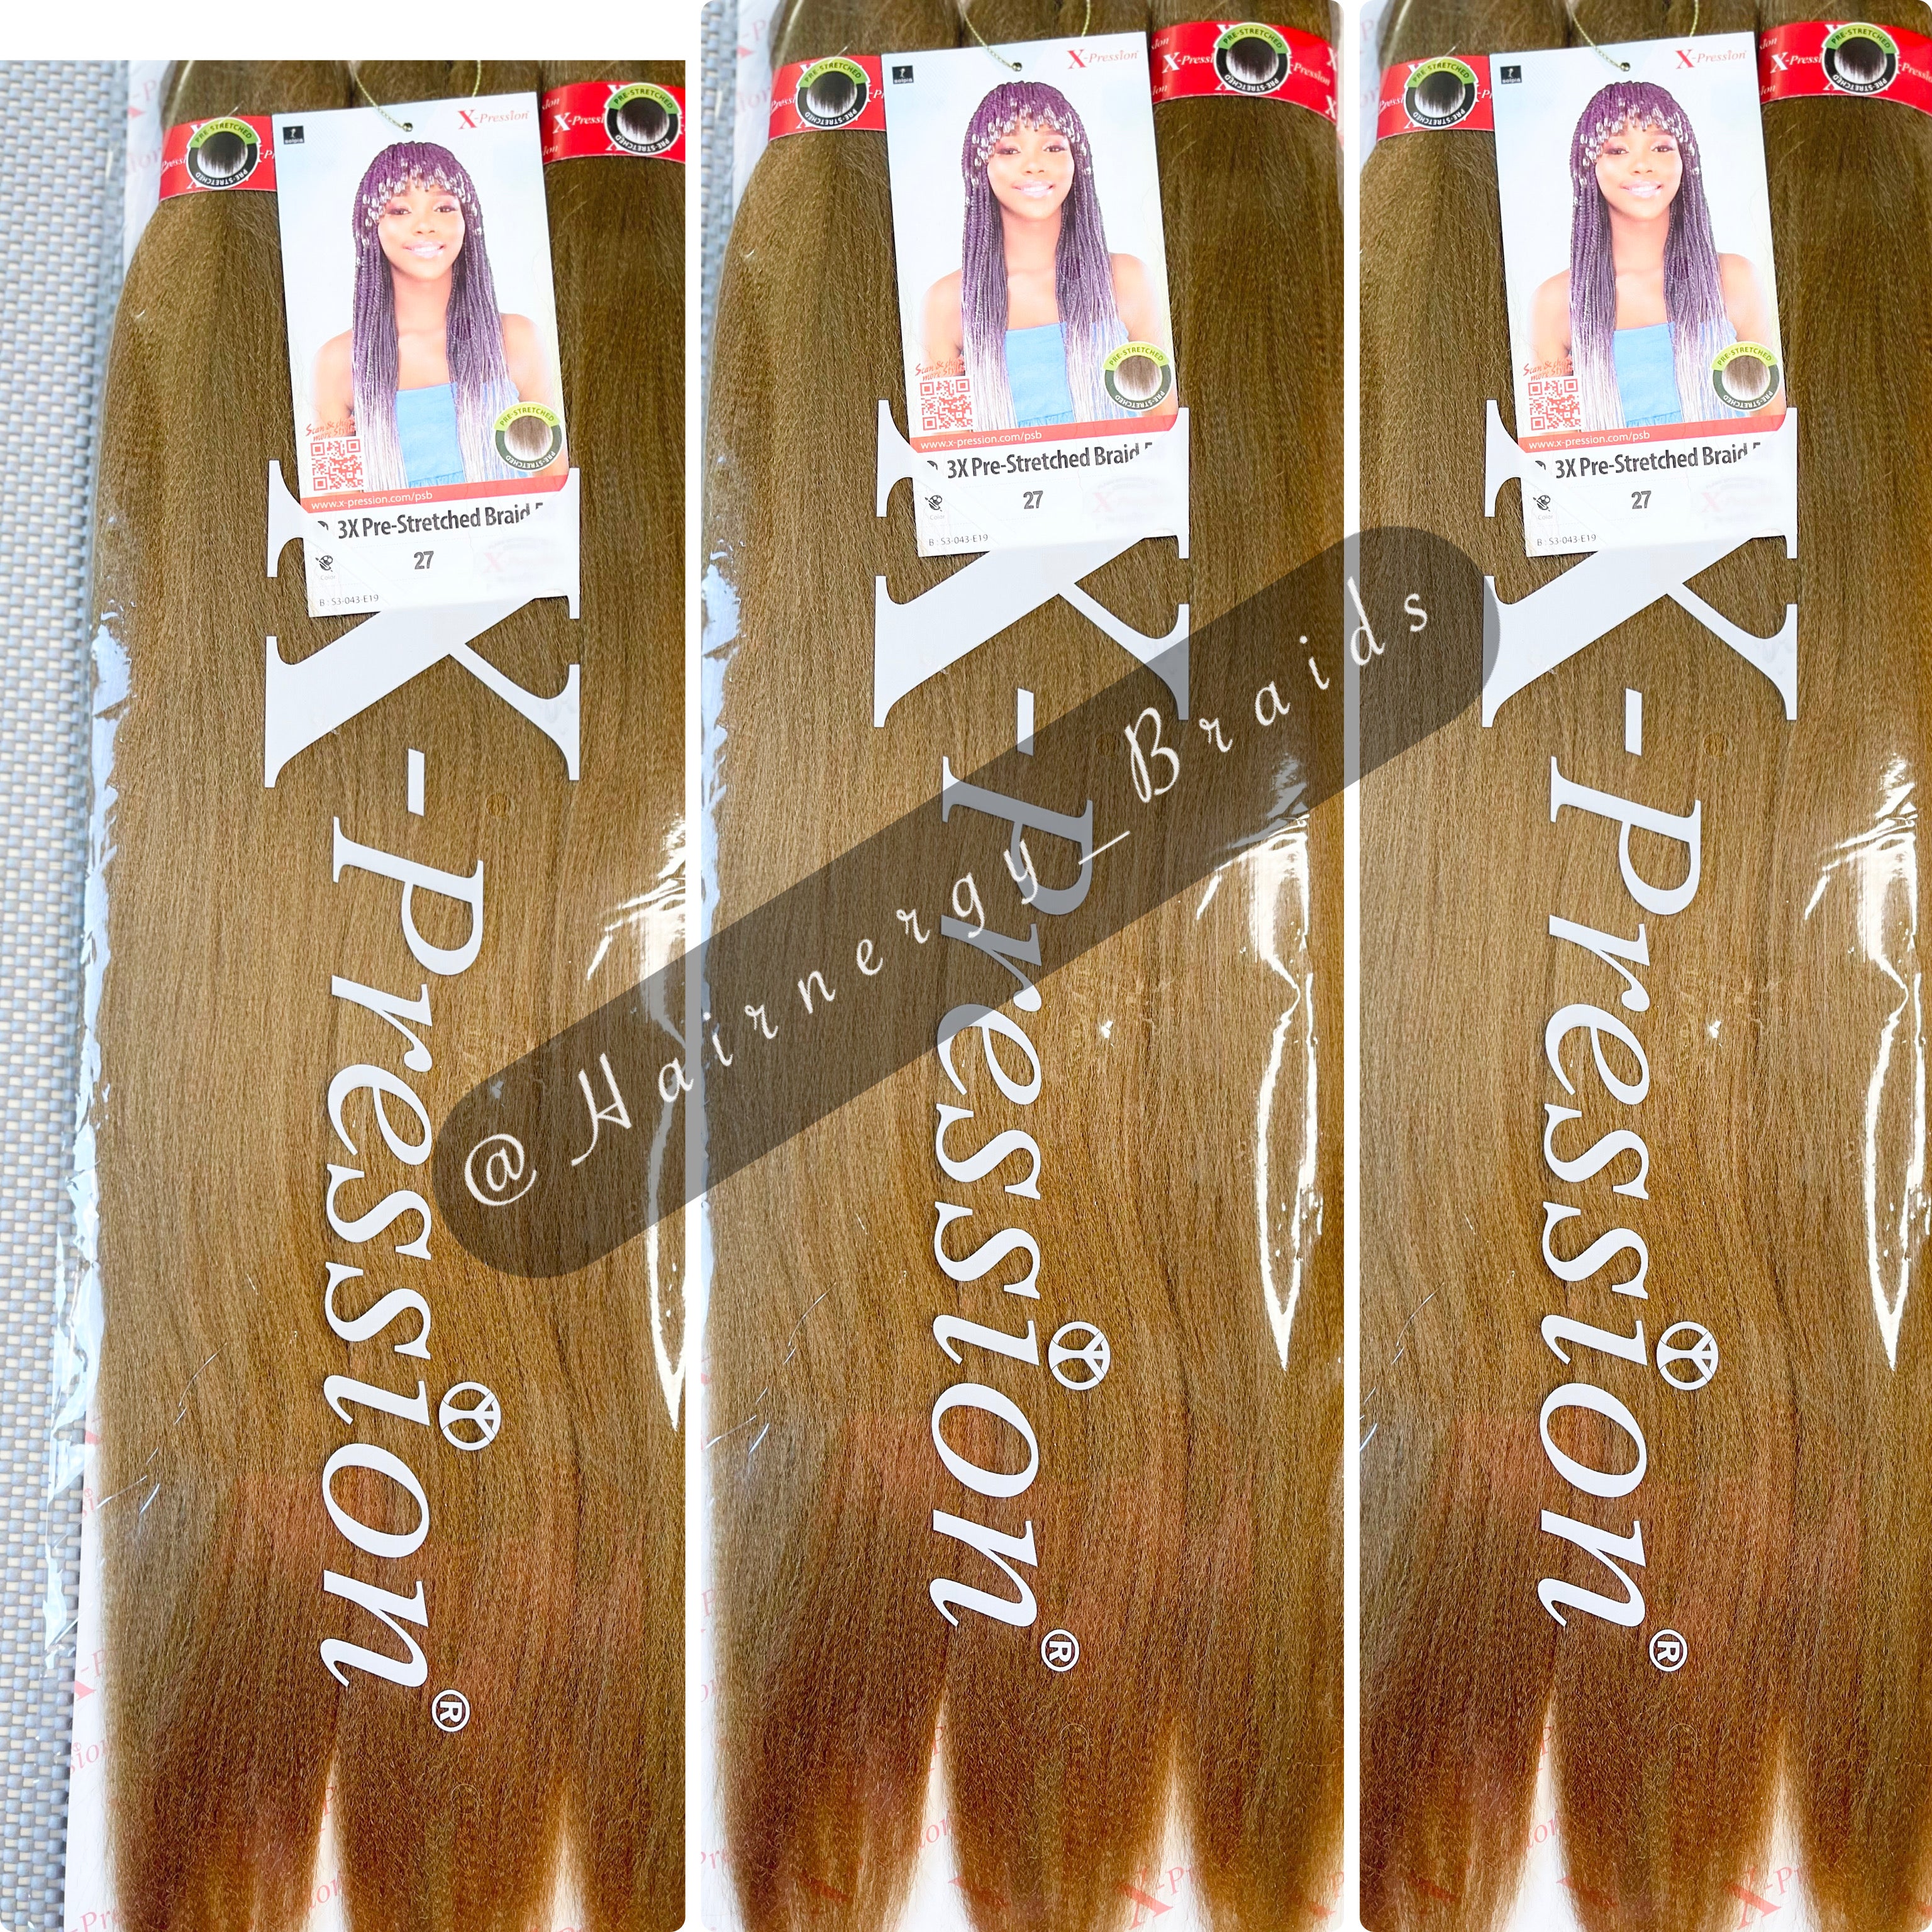 Hairnergy Braids Pre-Stretched Long Braiding Hair Extensions 4 Ombre C